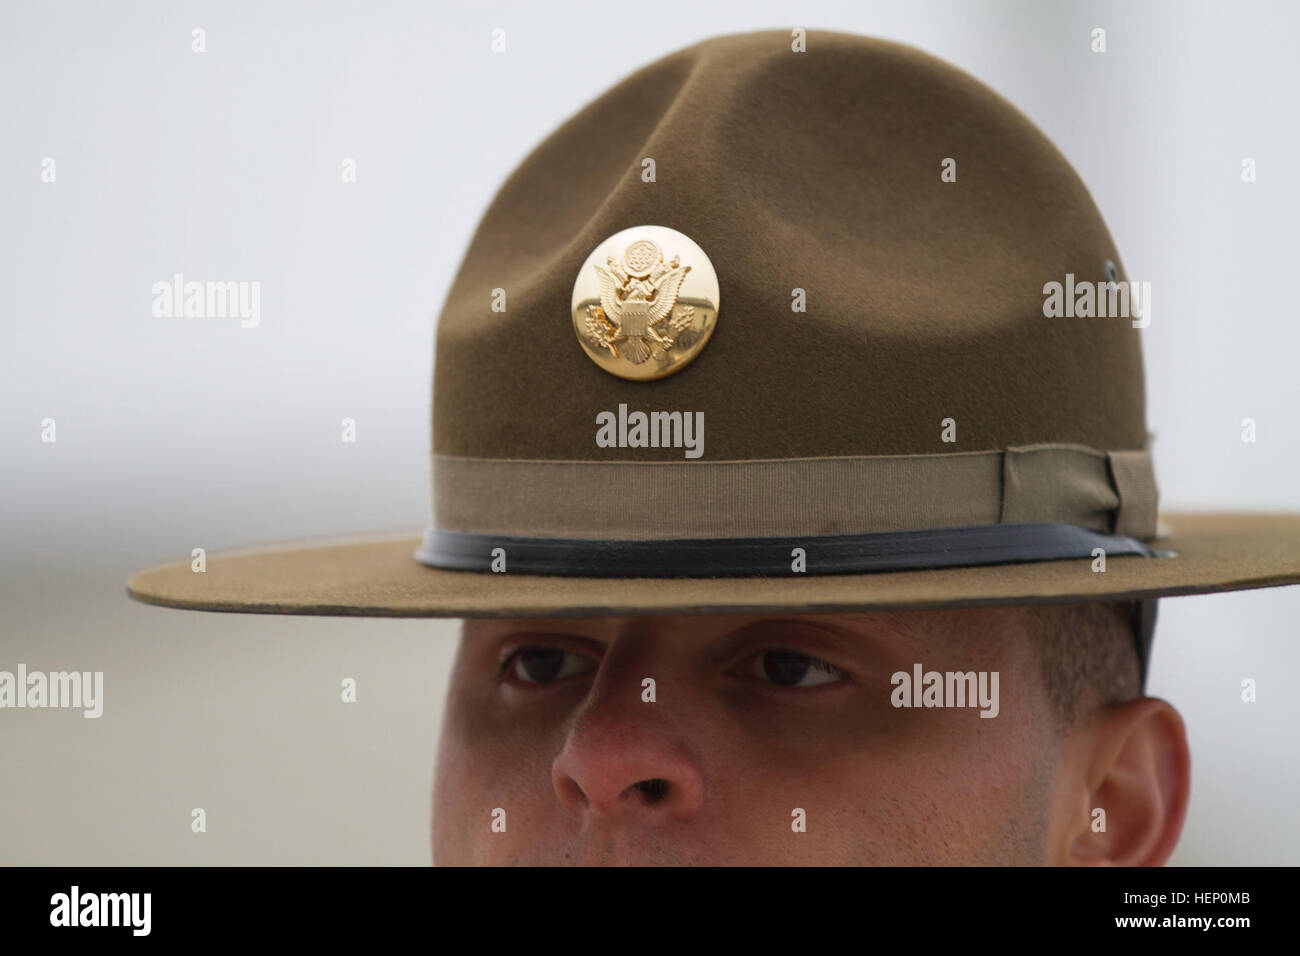 The olive drab headgear worn by male drill sergeants today has a flat brim, Montana Peak, and bears a gold disc of the Great Seal of the United States on its front. Infantry Soldiers wear an infantry blue disc under the seal. Drill sergeants first wore this hat in 1964 as a way of distinguishing themselves from those whom they were charged with transforming into Soldiers. It has been their proud symbol ever since. A legendary symbol of pride 141204-A-OY832-867 Stock Photo